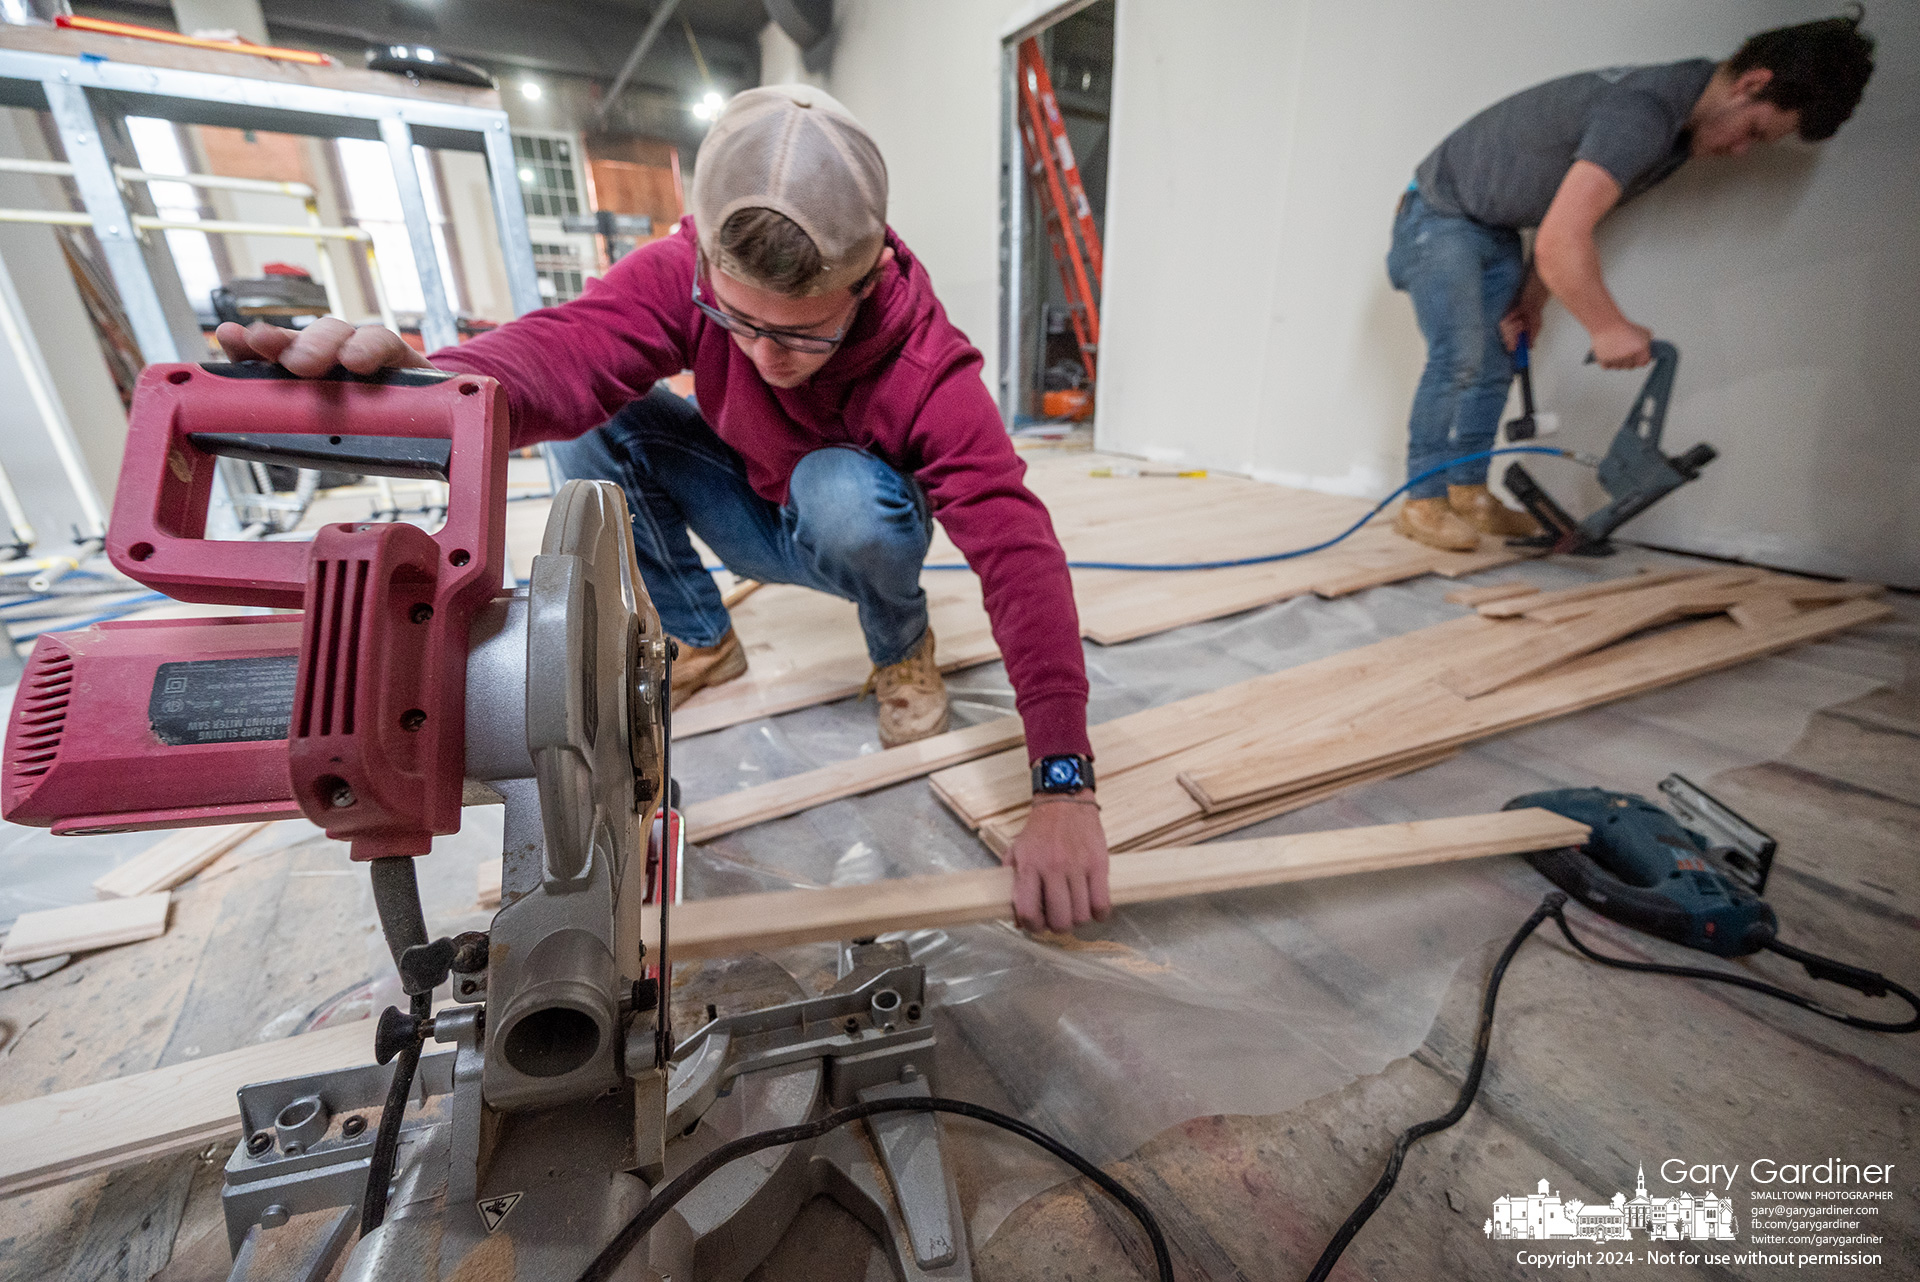 A flooring crew installs new tongue and groove maple strips to match the existing floor at High Bank Distillery in Uptown, which will be sanded and stained for a new durable surface. My Final Photo for February 28, 2024.